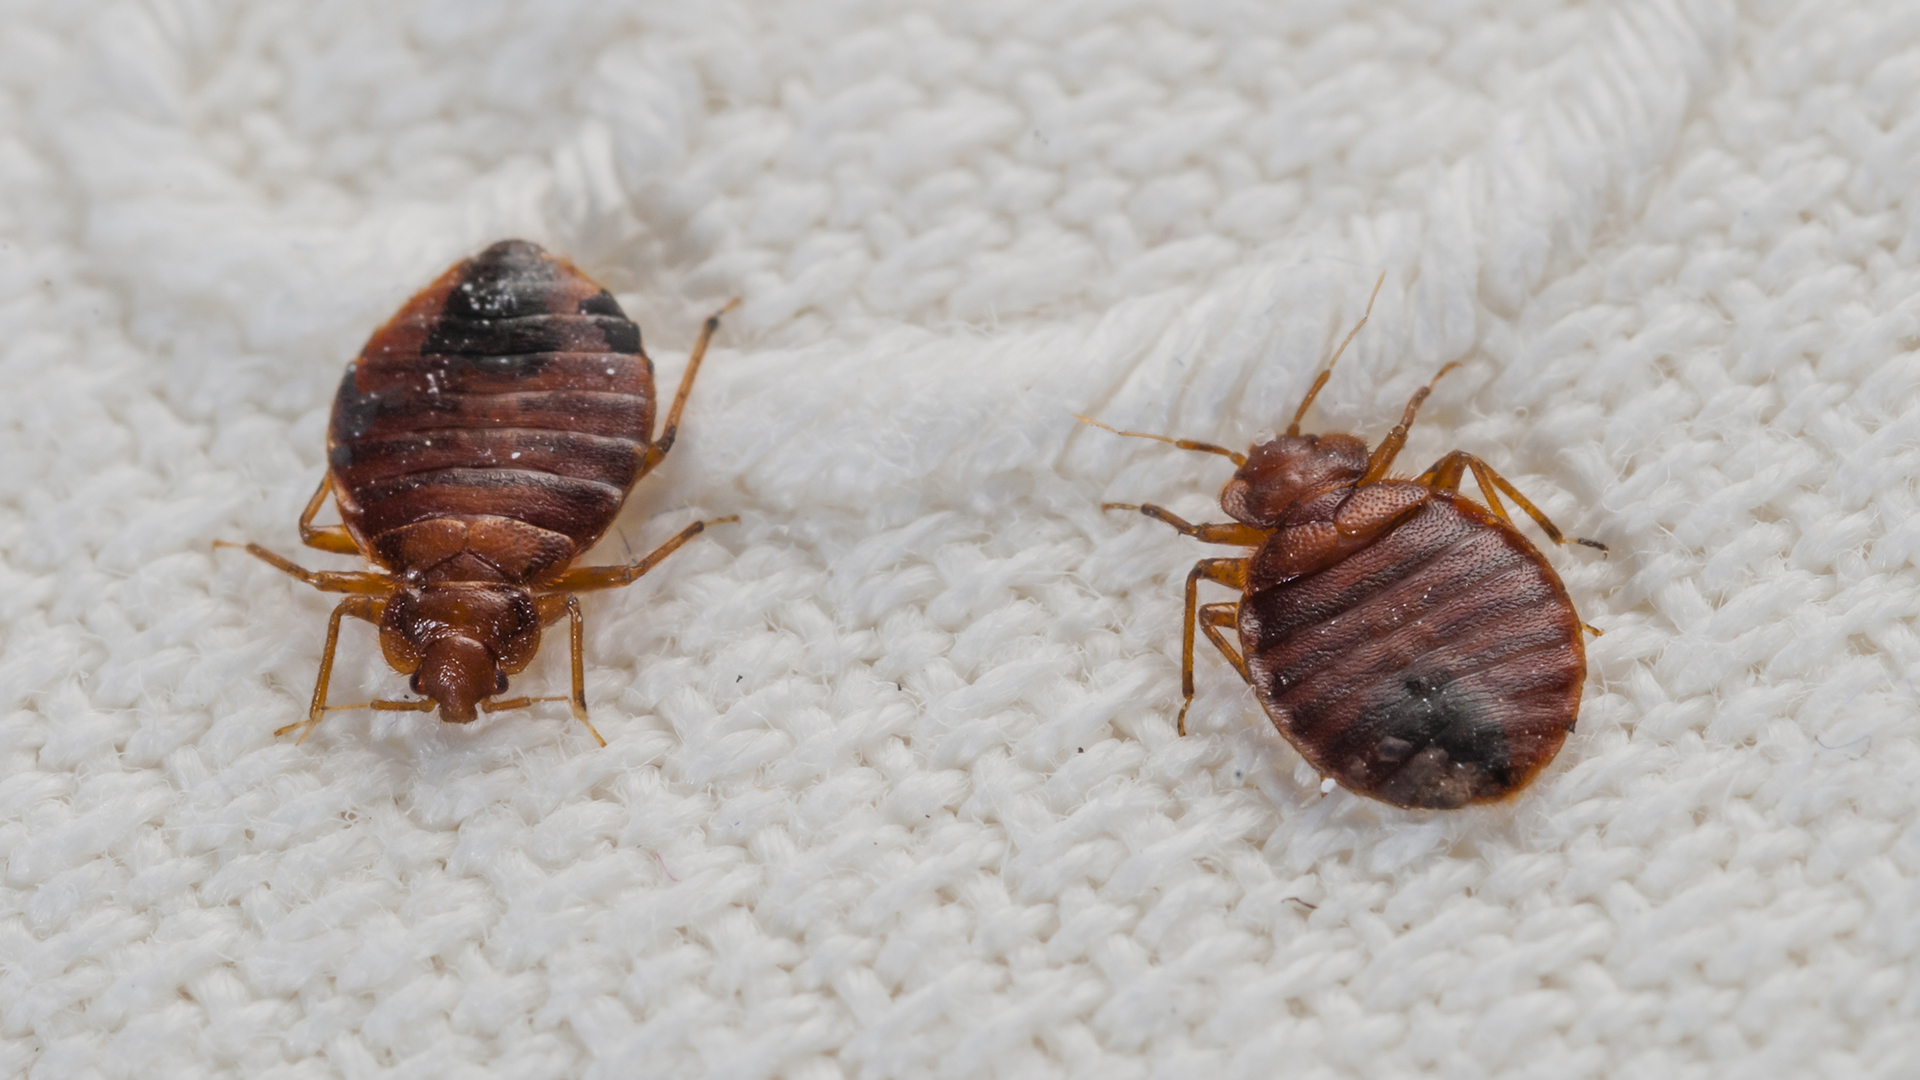 Treating An Existing Bed Bug Infestation